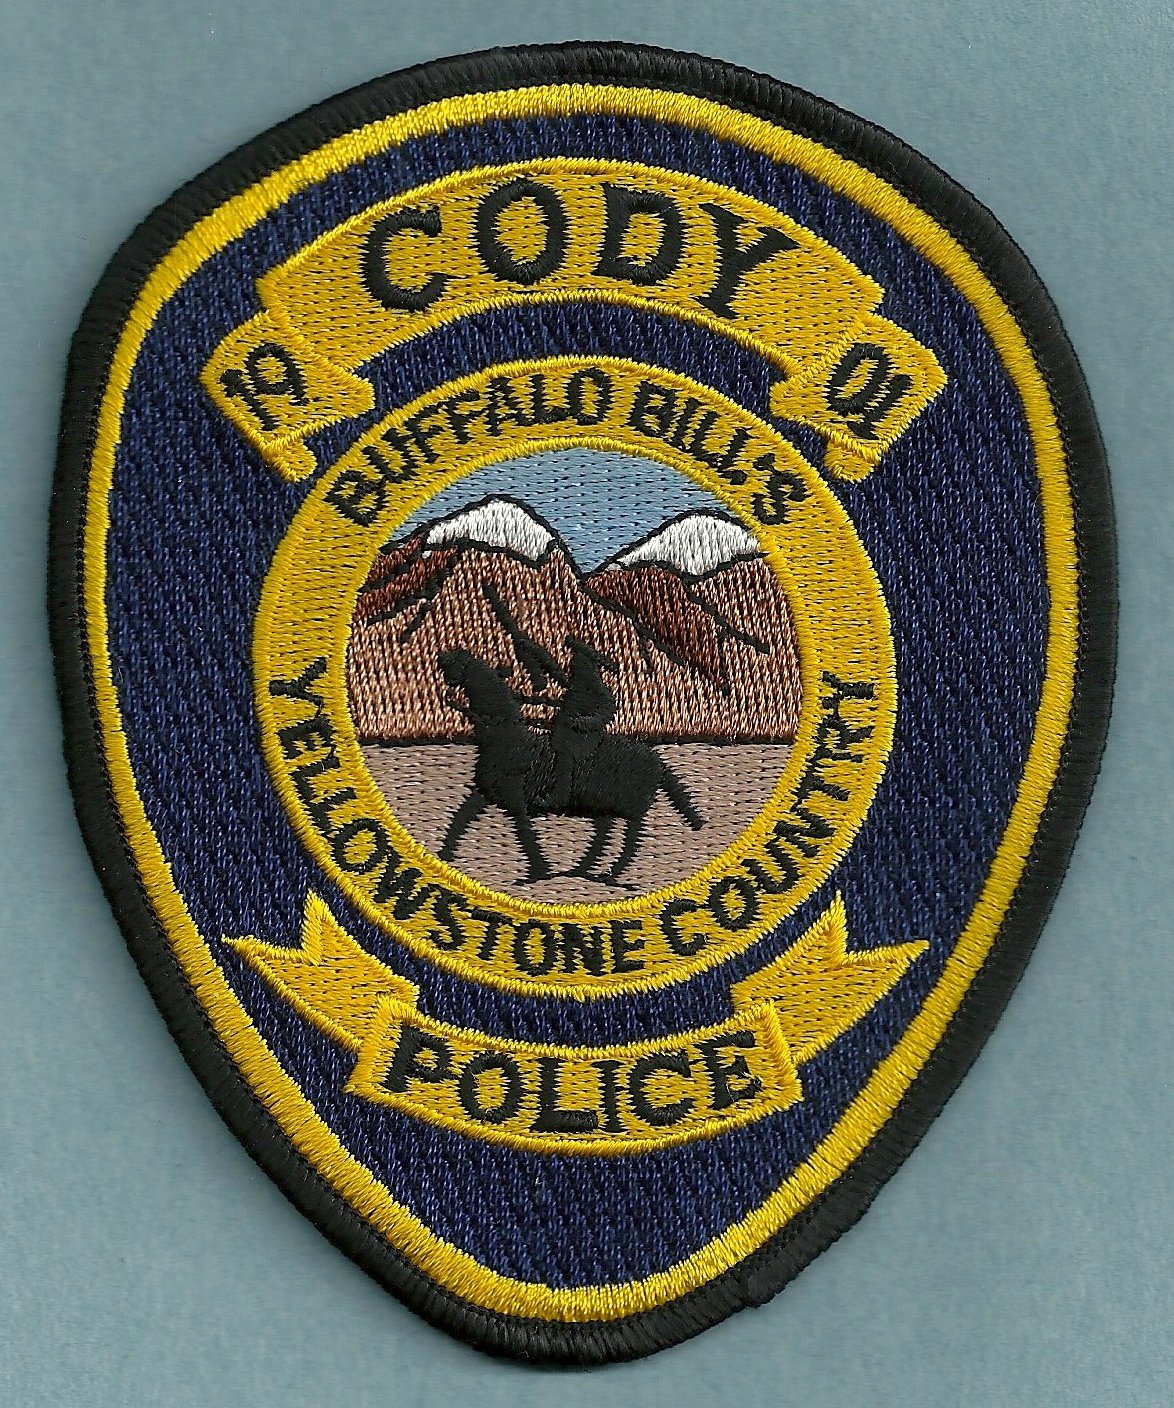 CODY WYOMING POLICE SHOULDER PATCH 